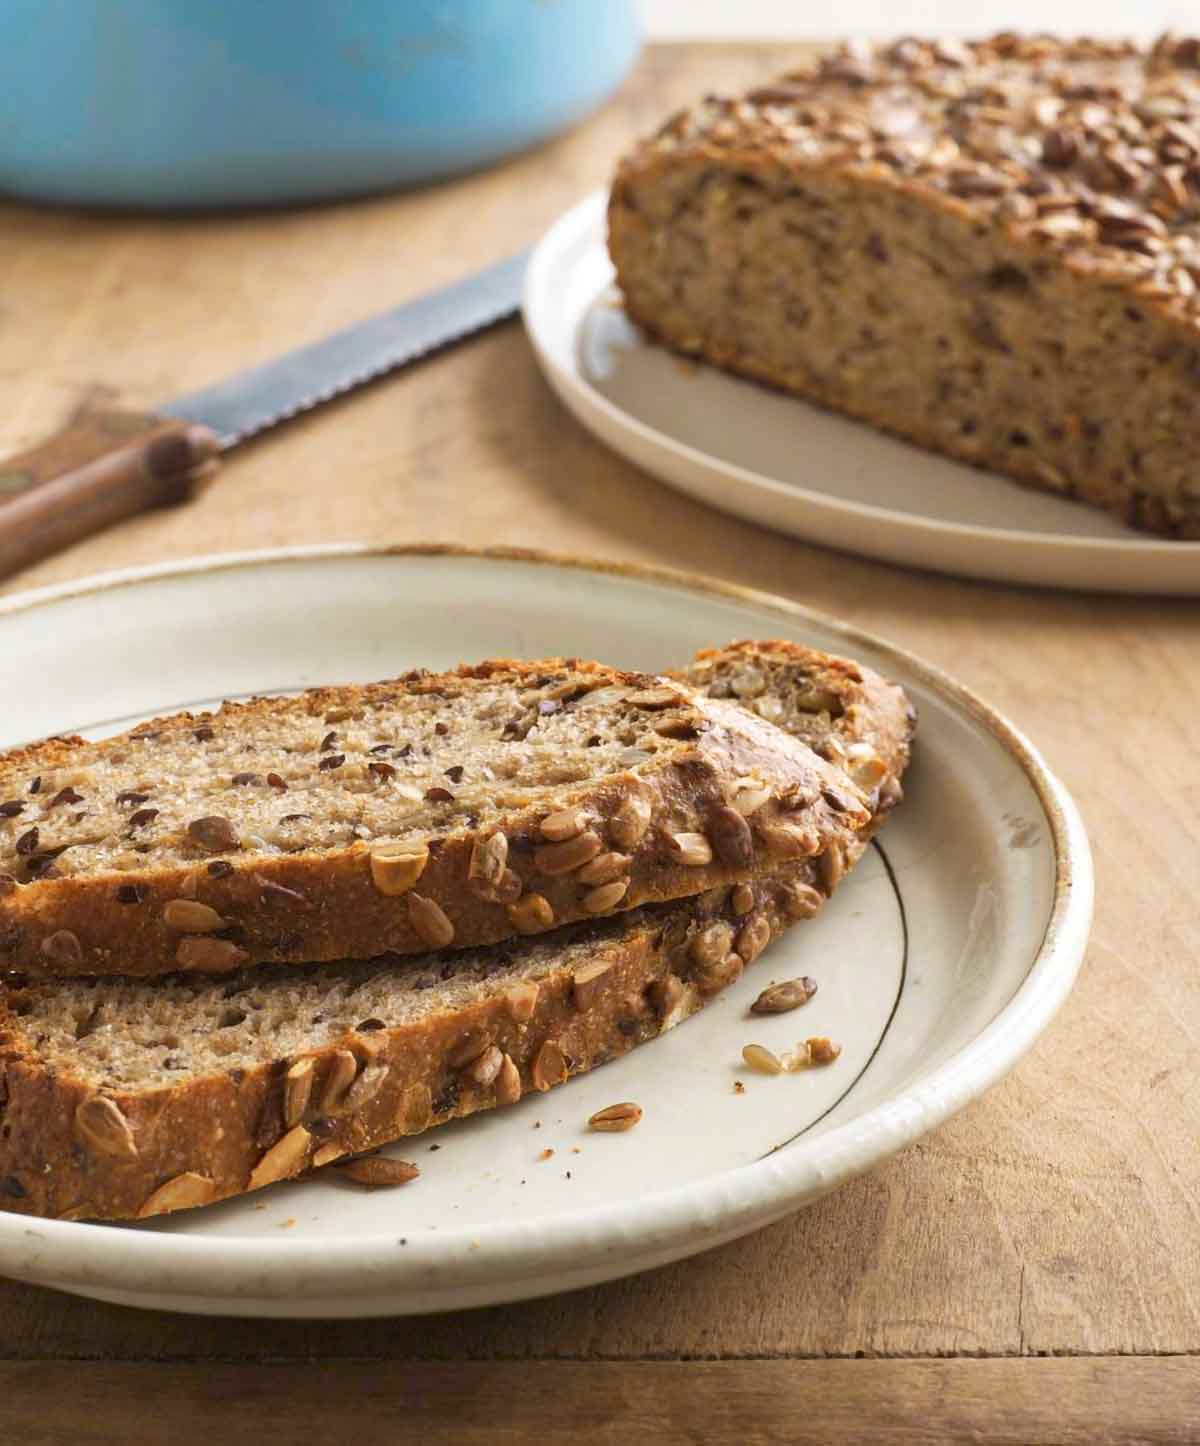 Two slices of no-knead pumpkin-sunflower seed bread on a white plate with the remaining loaf next to it on a separate plate.